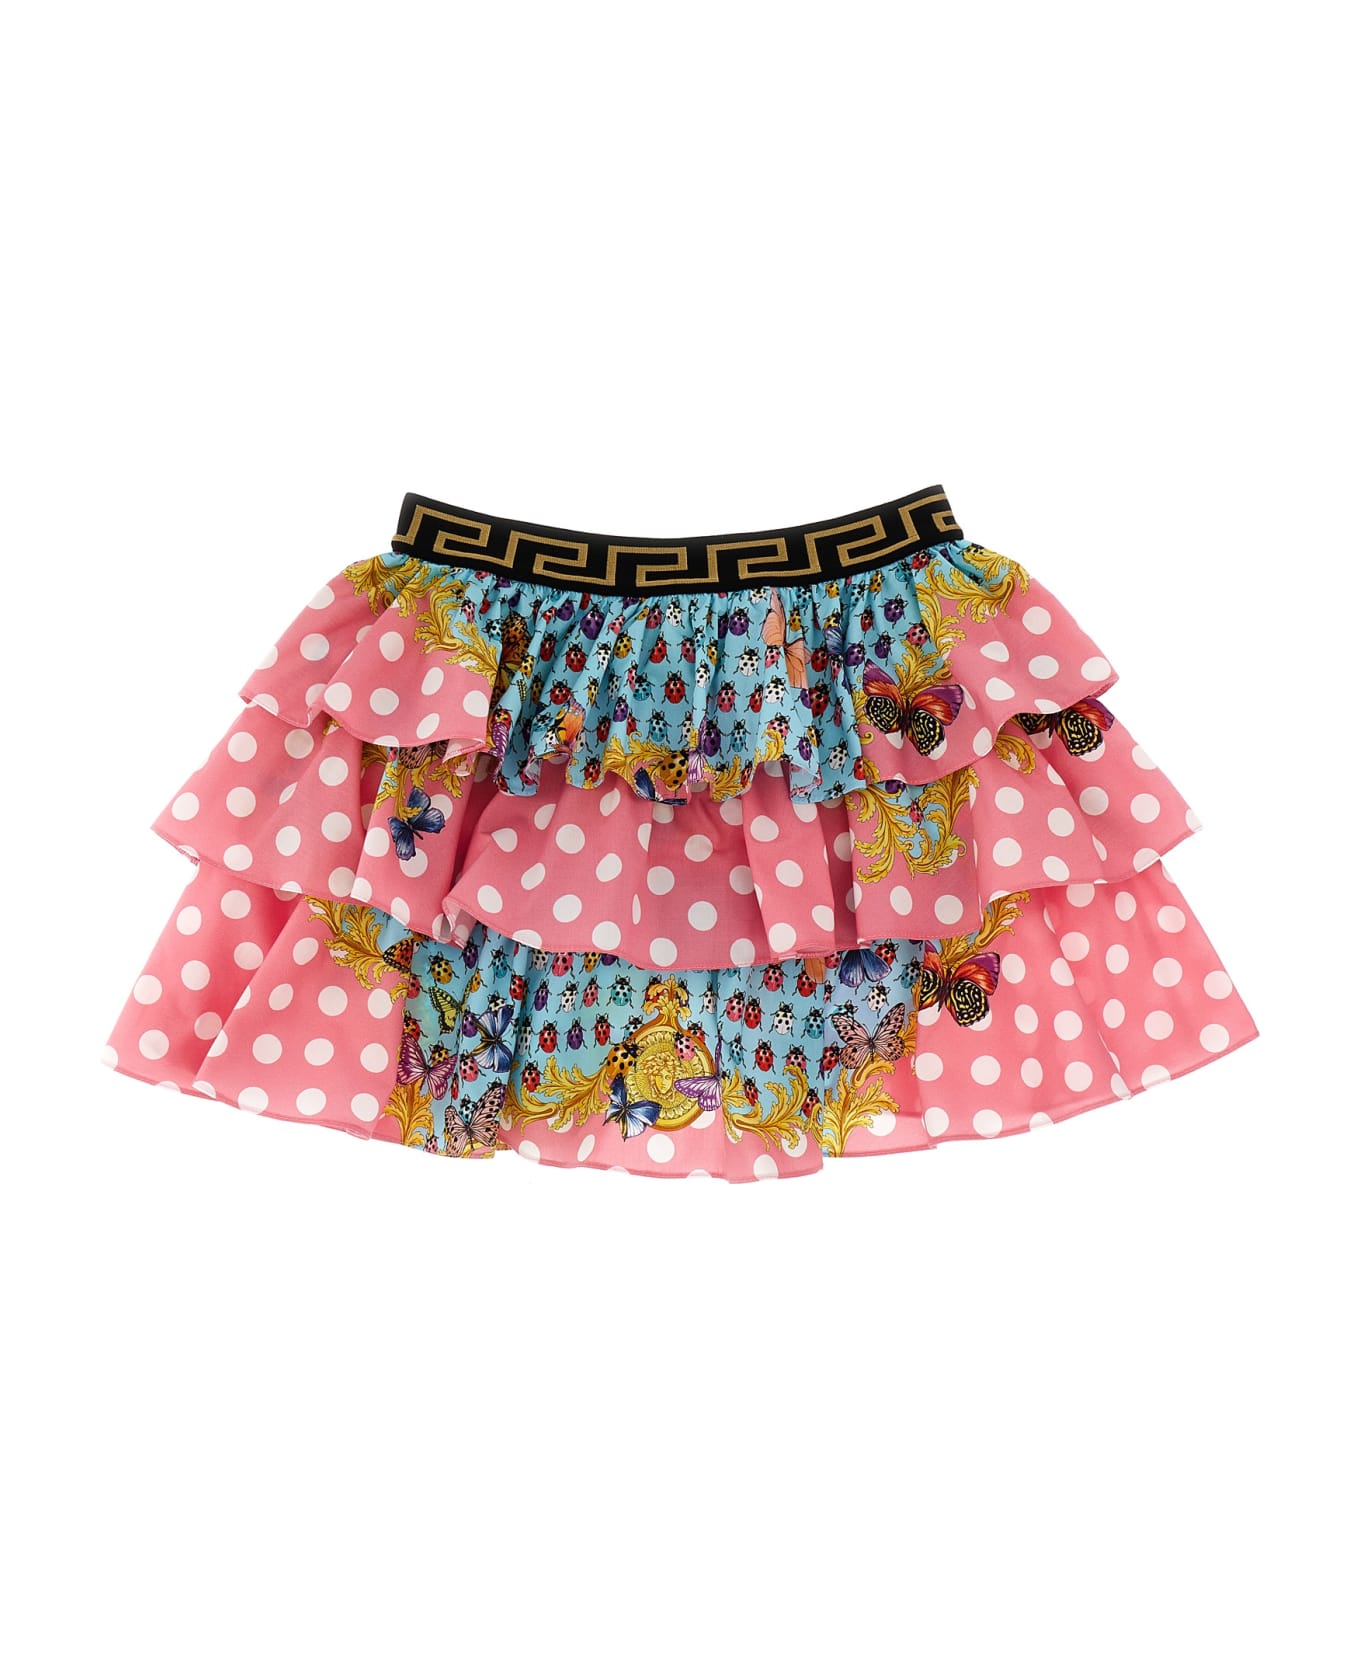 Versace Heritage Butterflies & Ladybugs Kids' Skirt With The Vacation Capsule - Multicolor